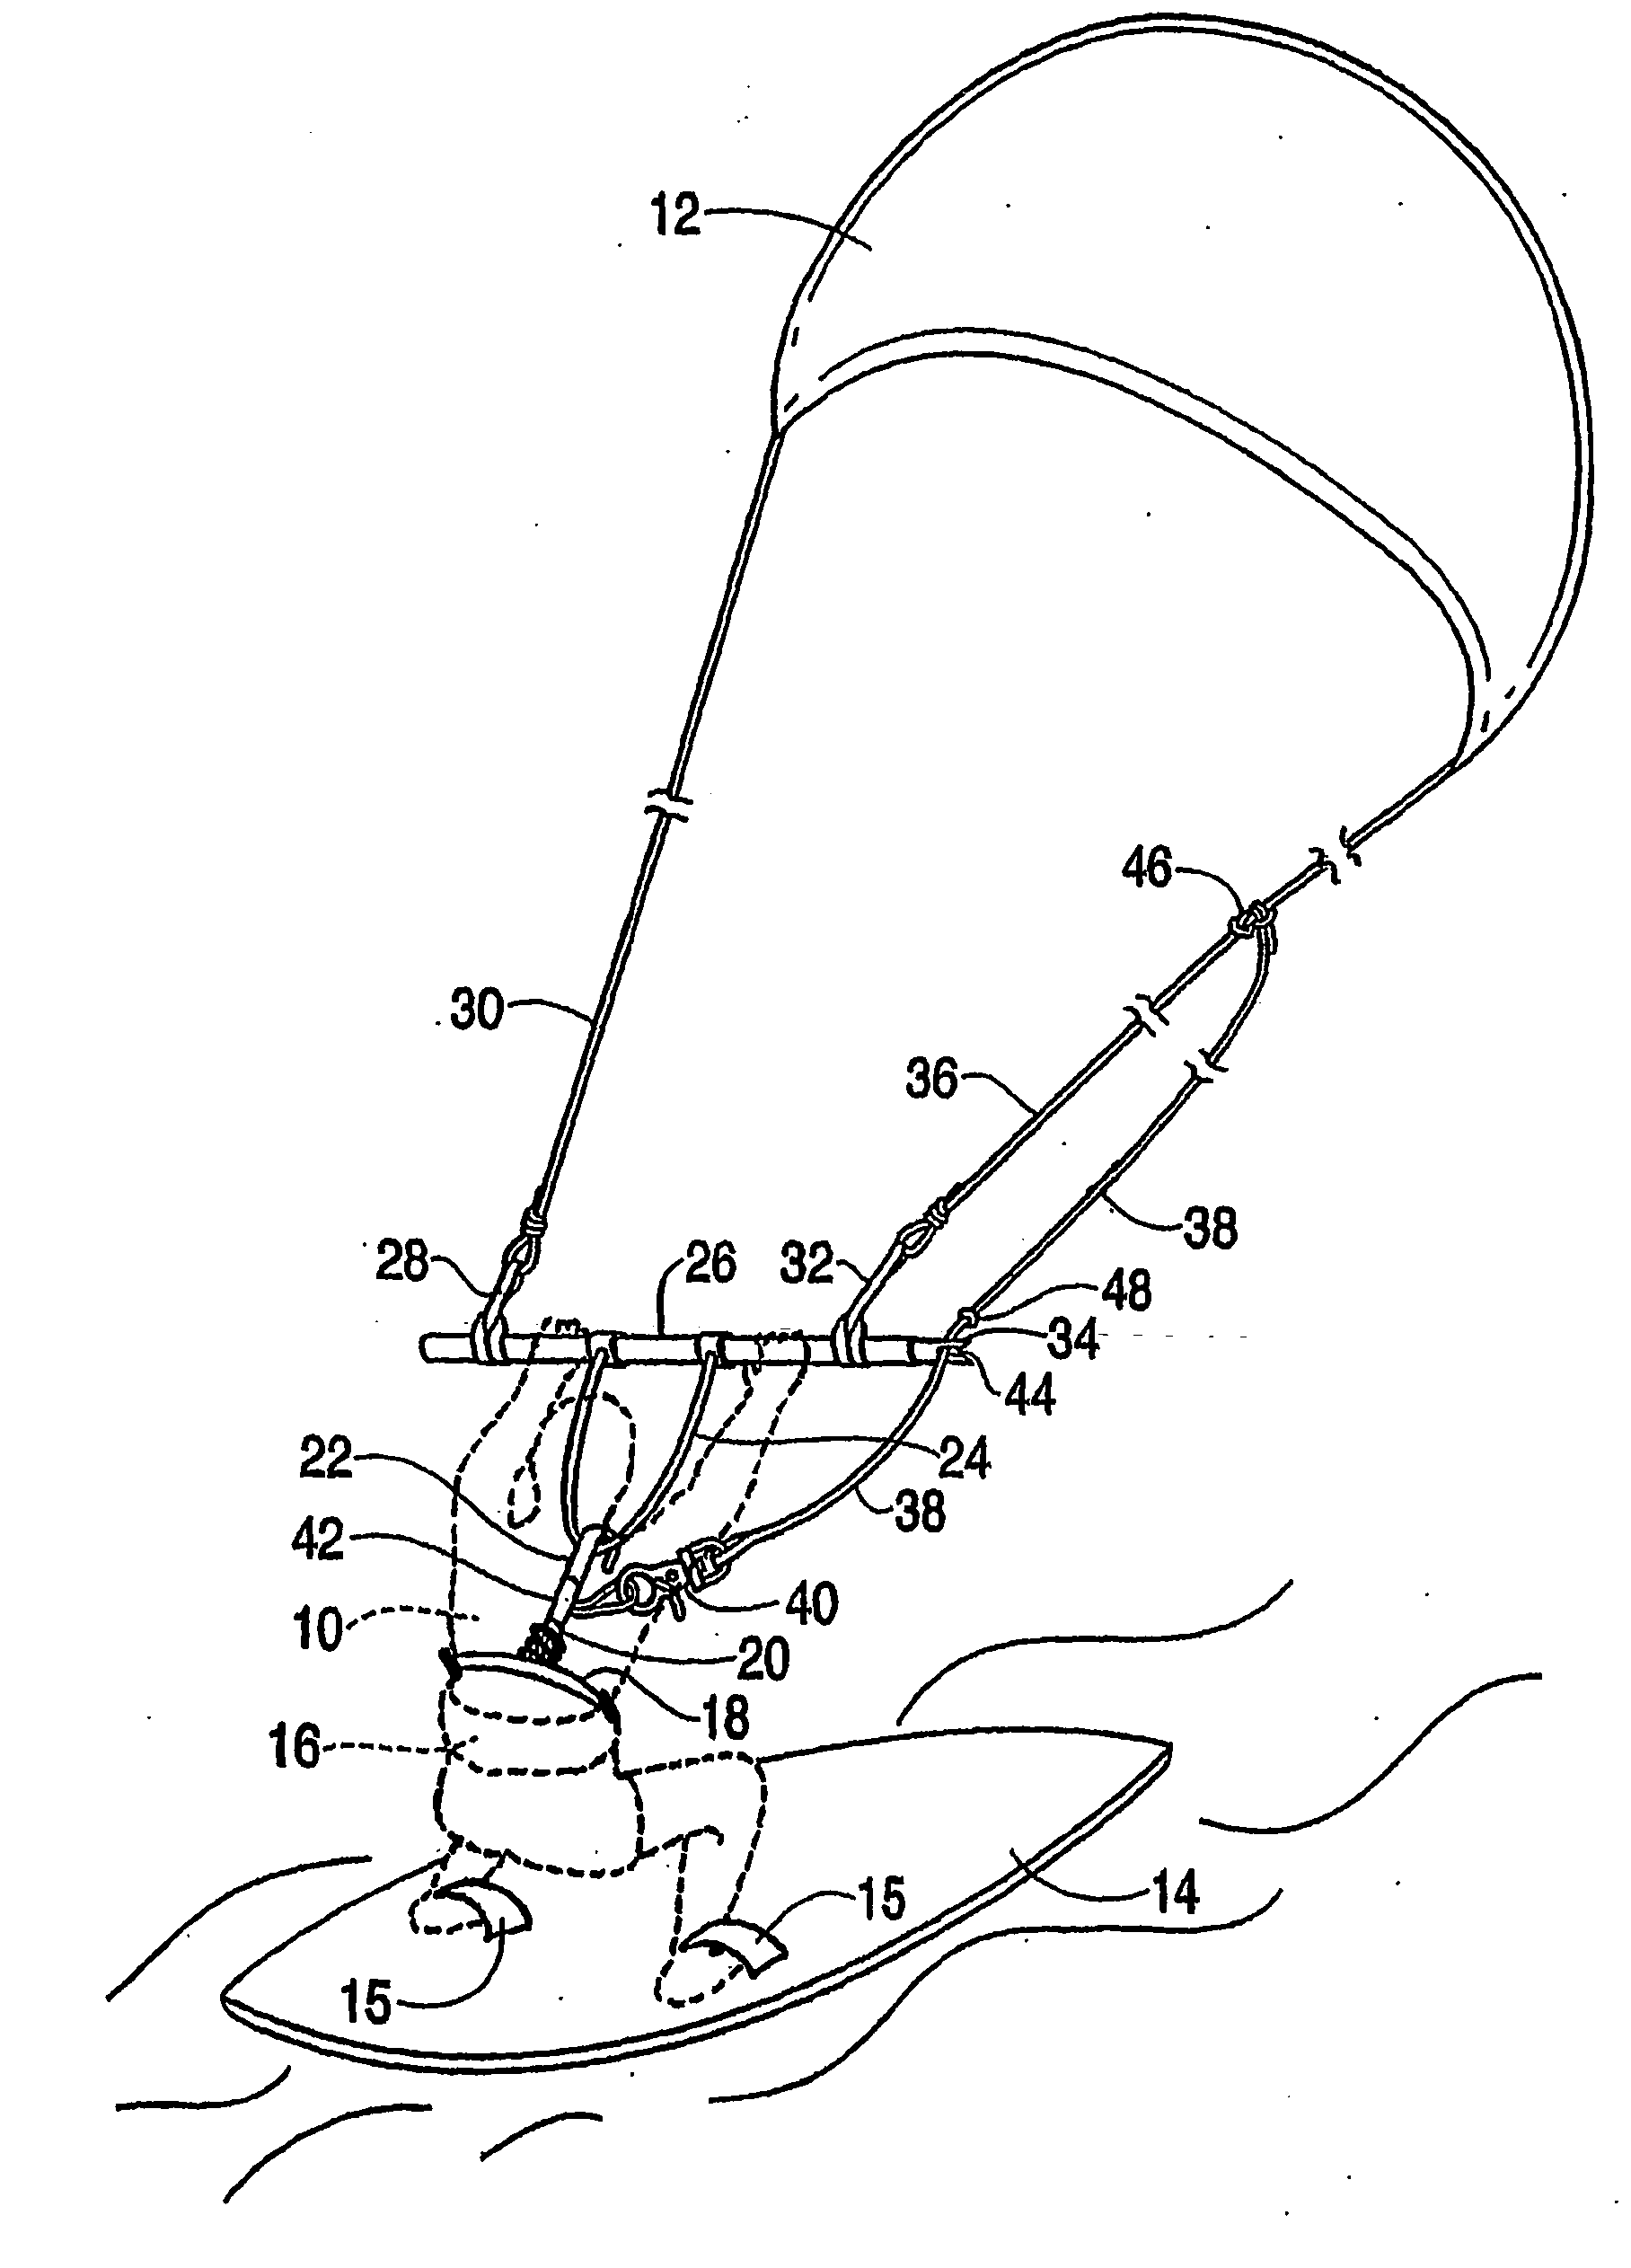 Control apparatus for kite powered conveyance device